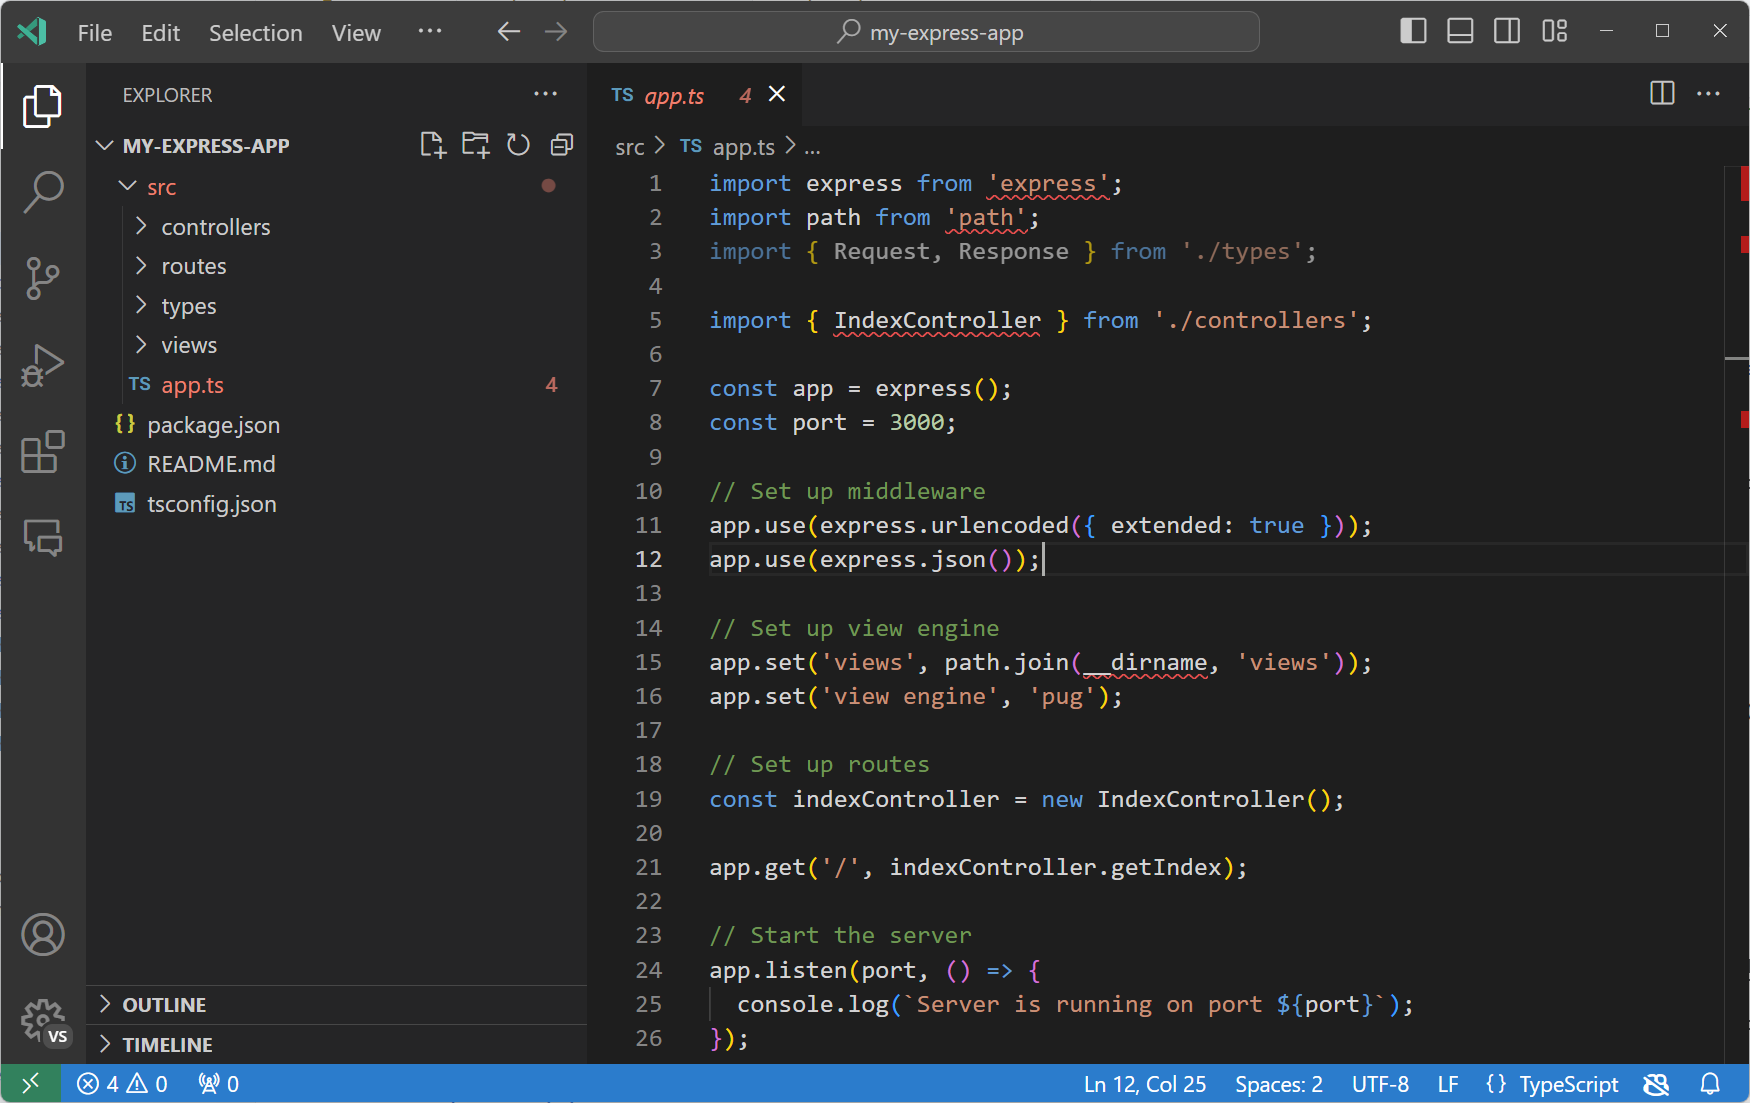 Screenshot of VS Code, showing the newly created workspace for an Express app.